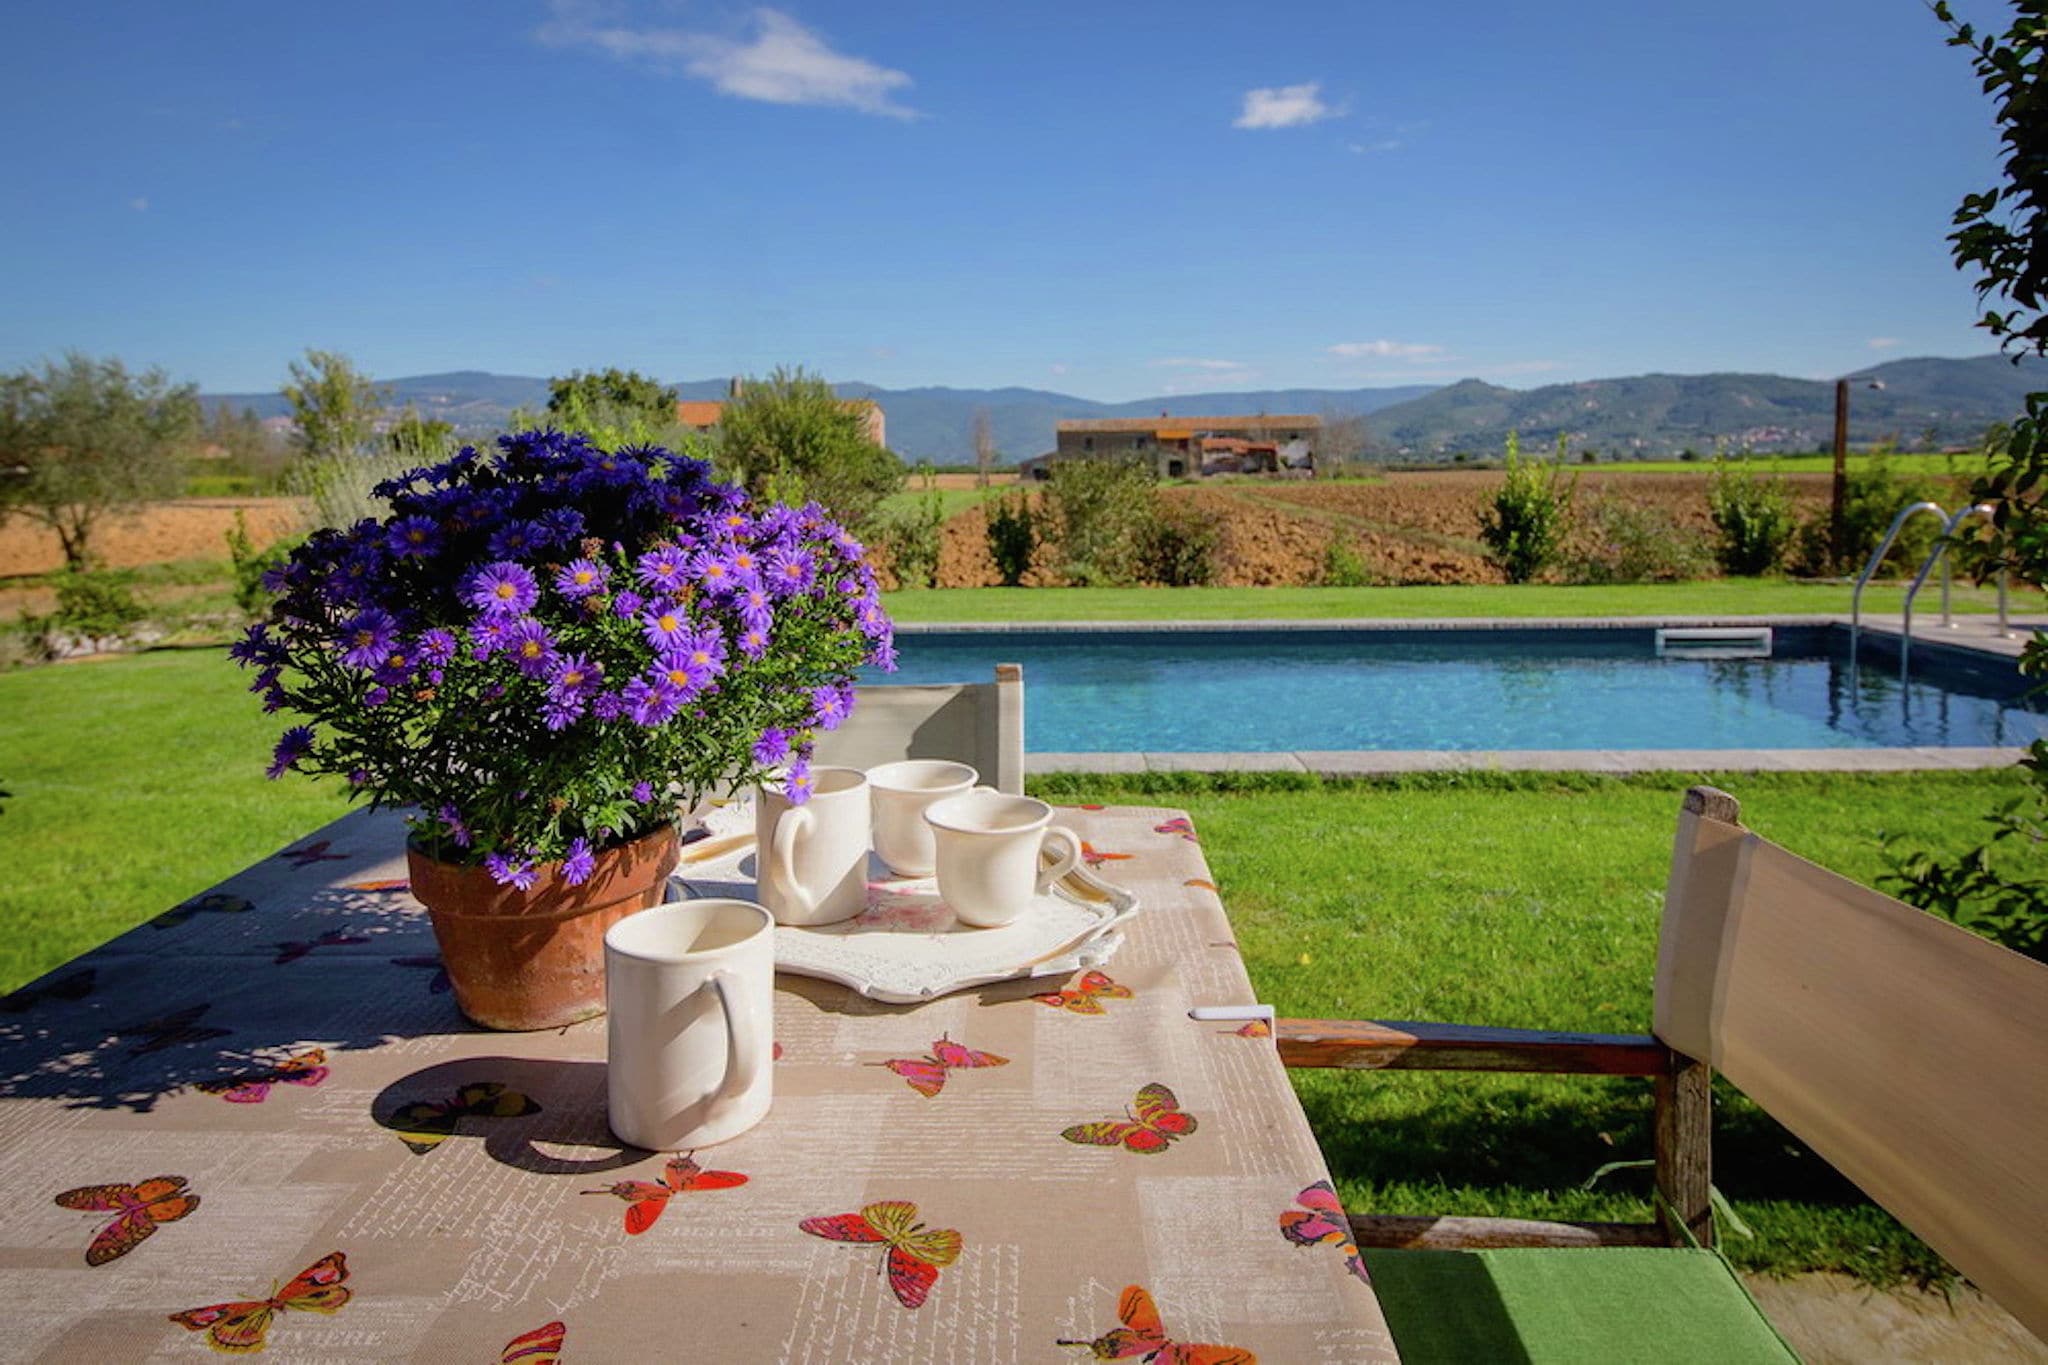 4-person villa with private swimming pool and garden in lovely surroundings near Cortona